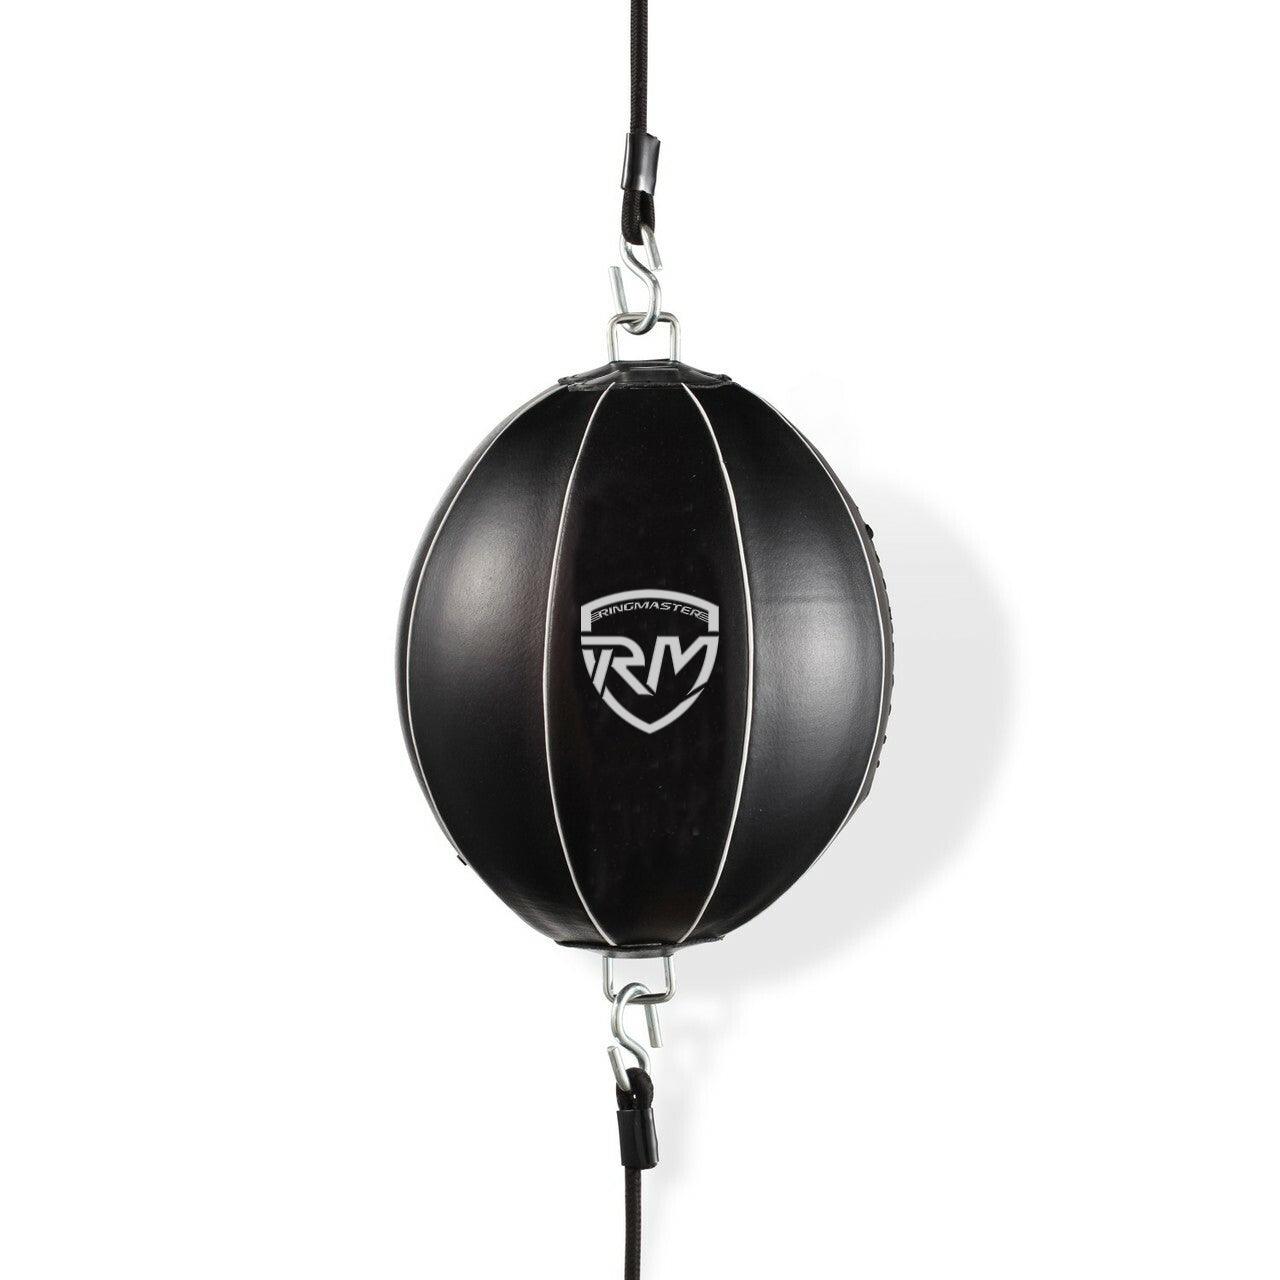 RingMaster Sports Double End Round Speed Ball BoxR Series Synthetic Leather White/Black - RINGMASTER SPORTS - Made For Champions